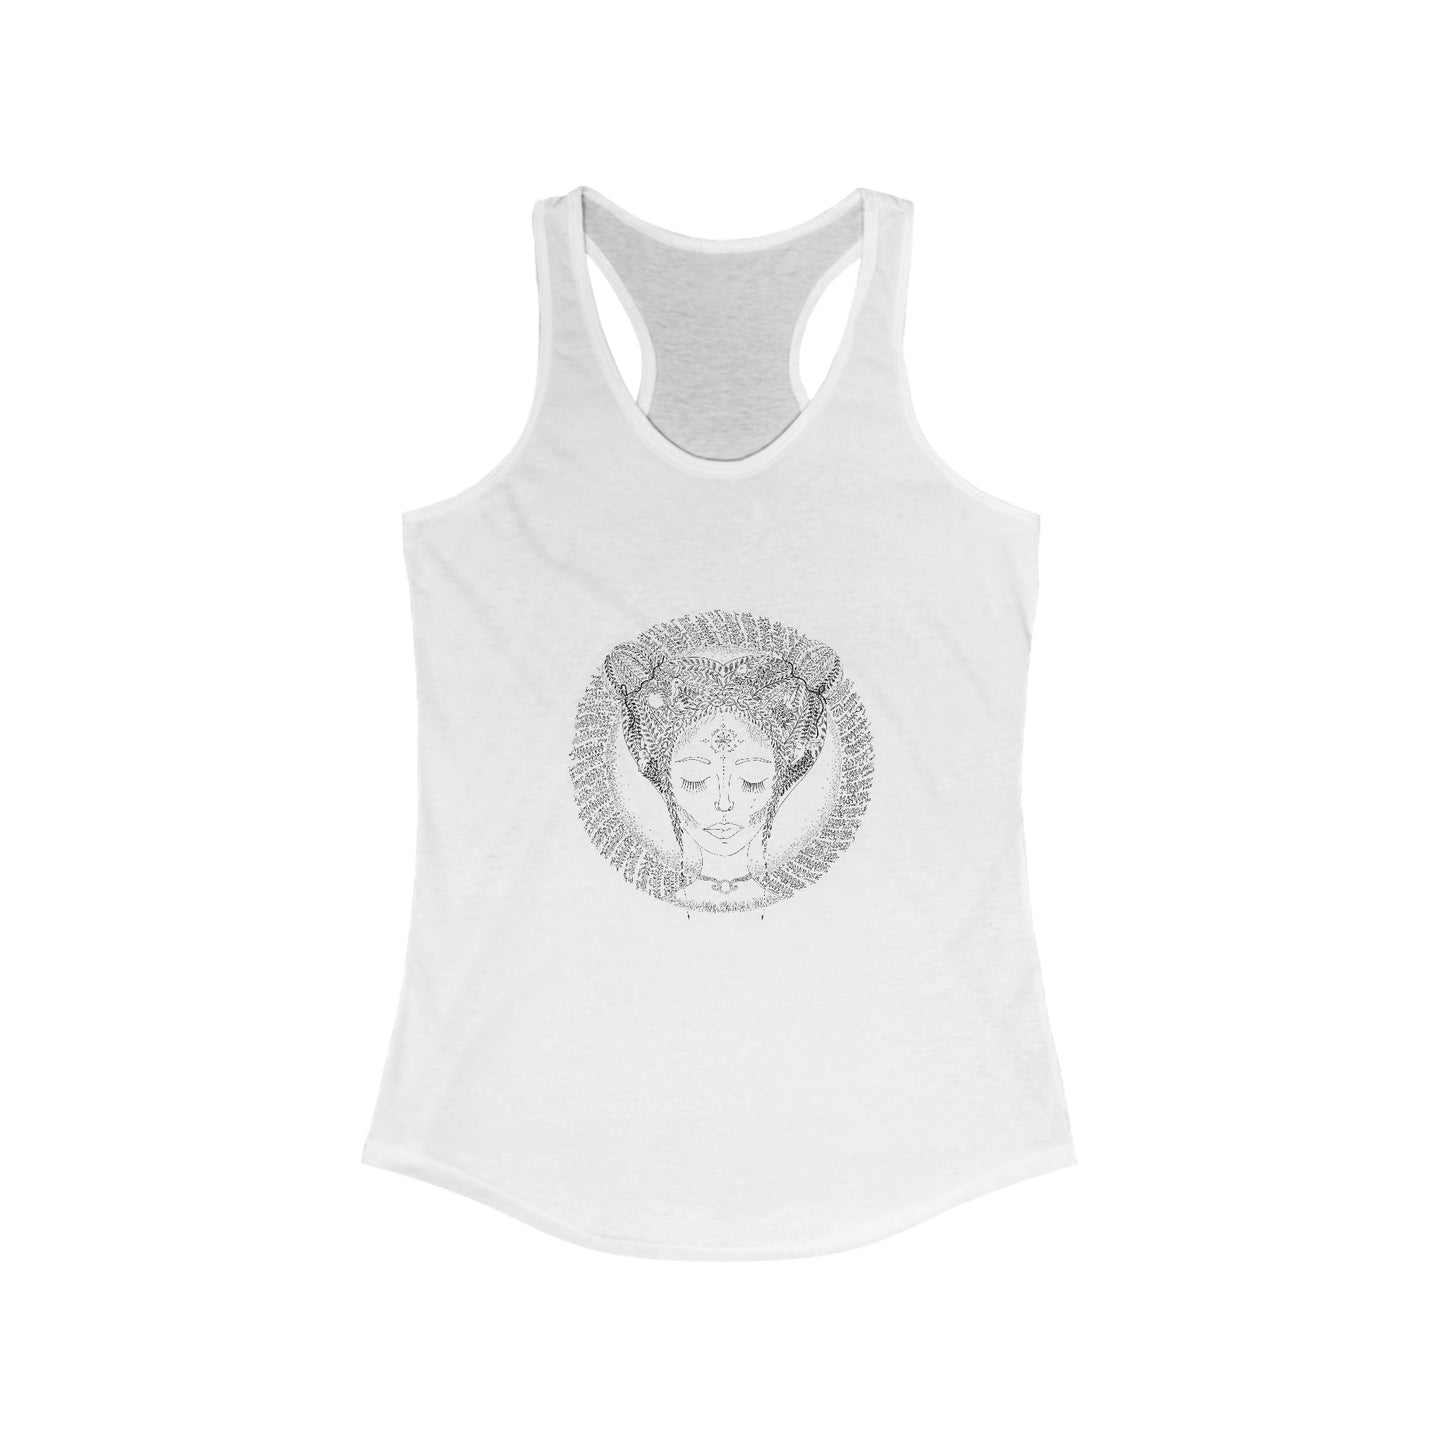 Chinese Zodiac Sign Tank Top (Rabbit) Limited Edition